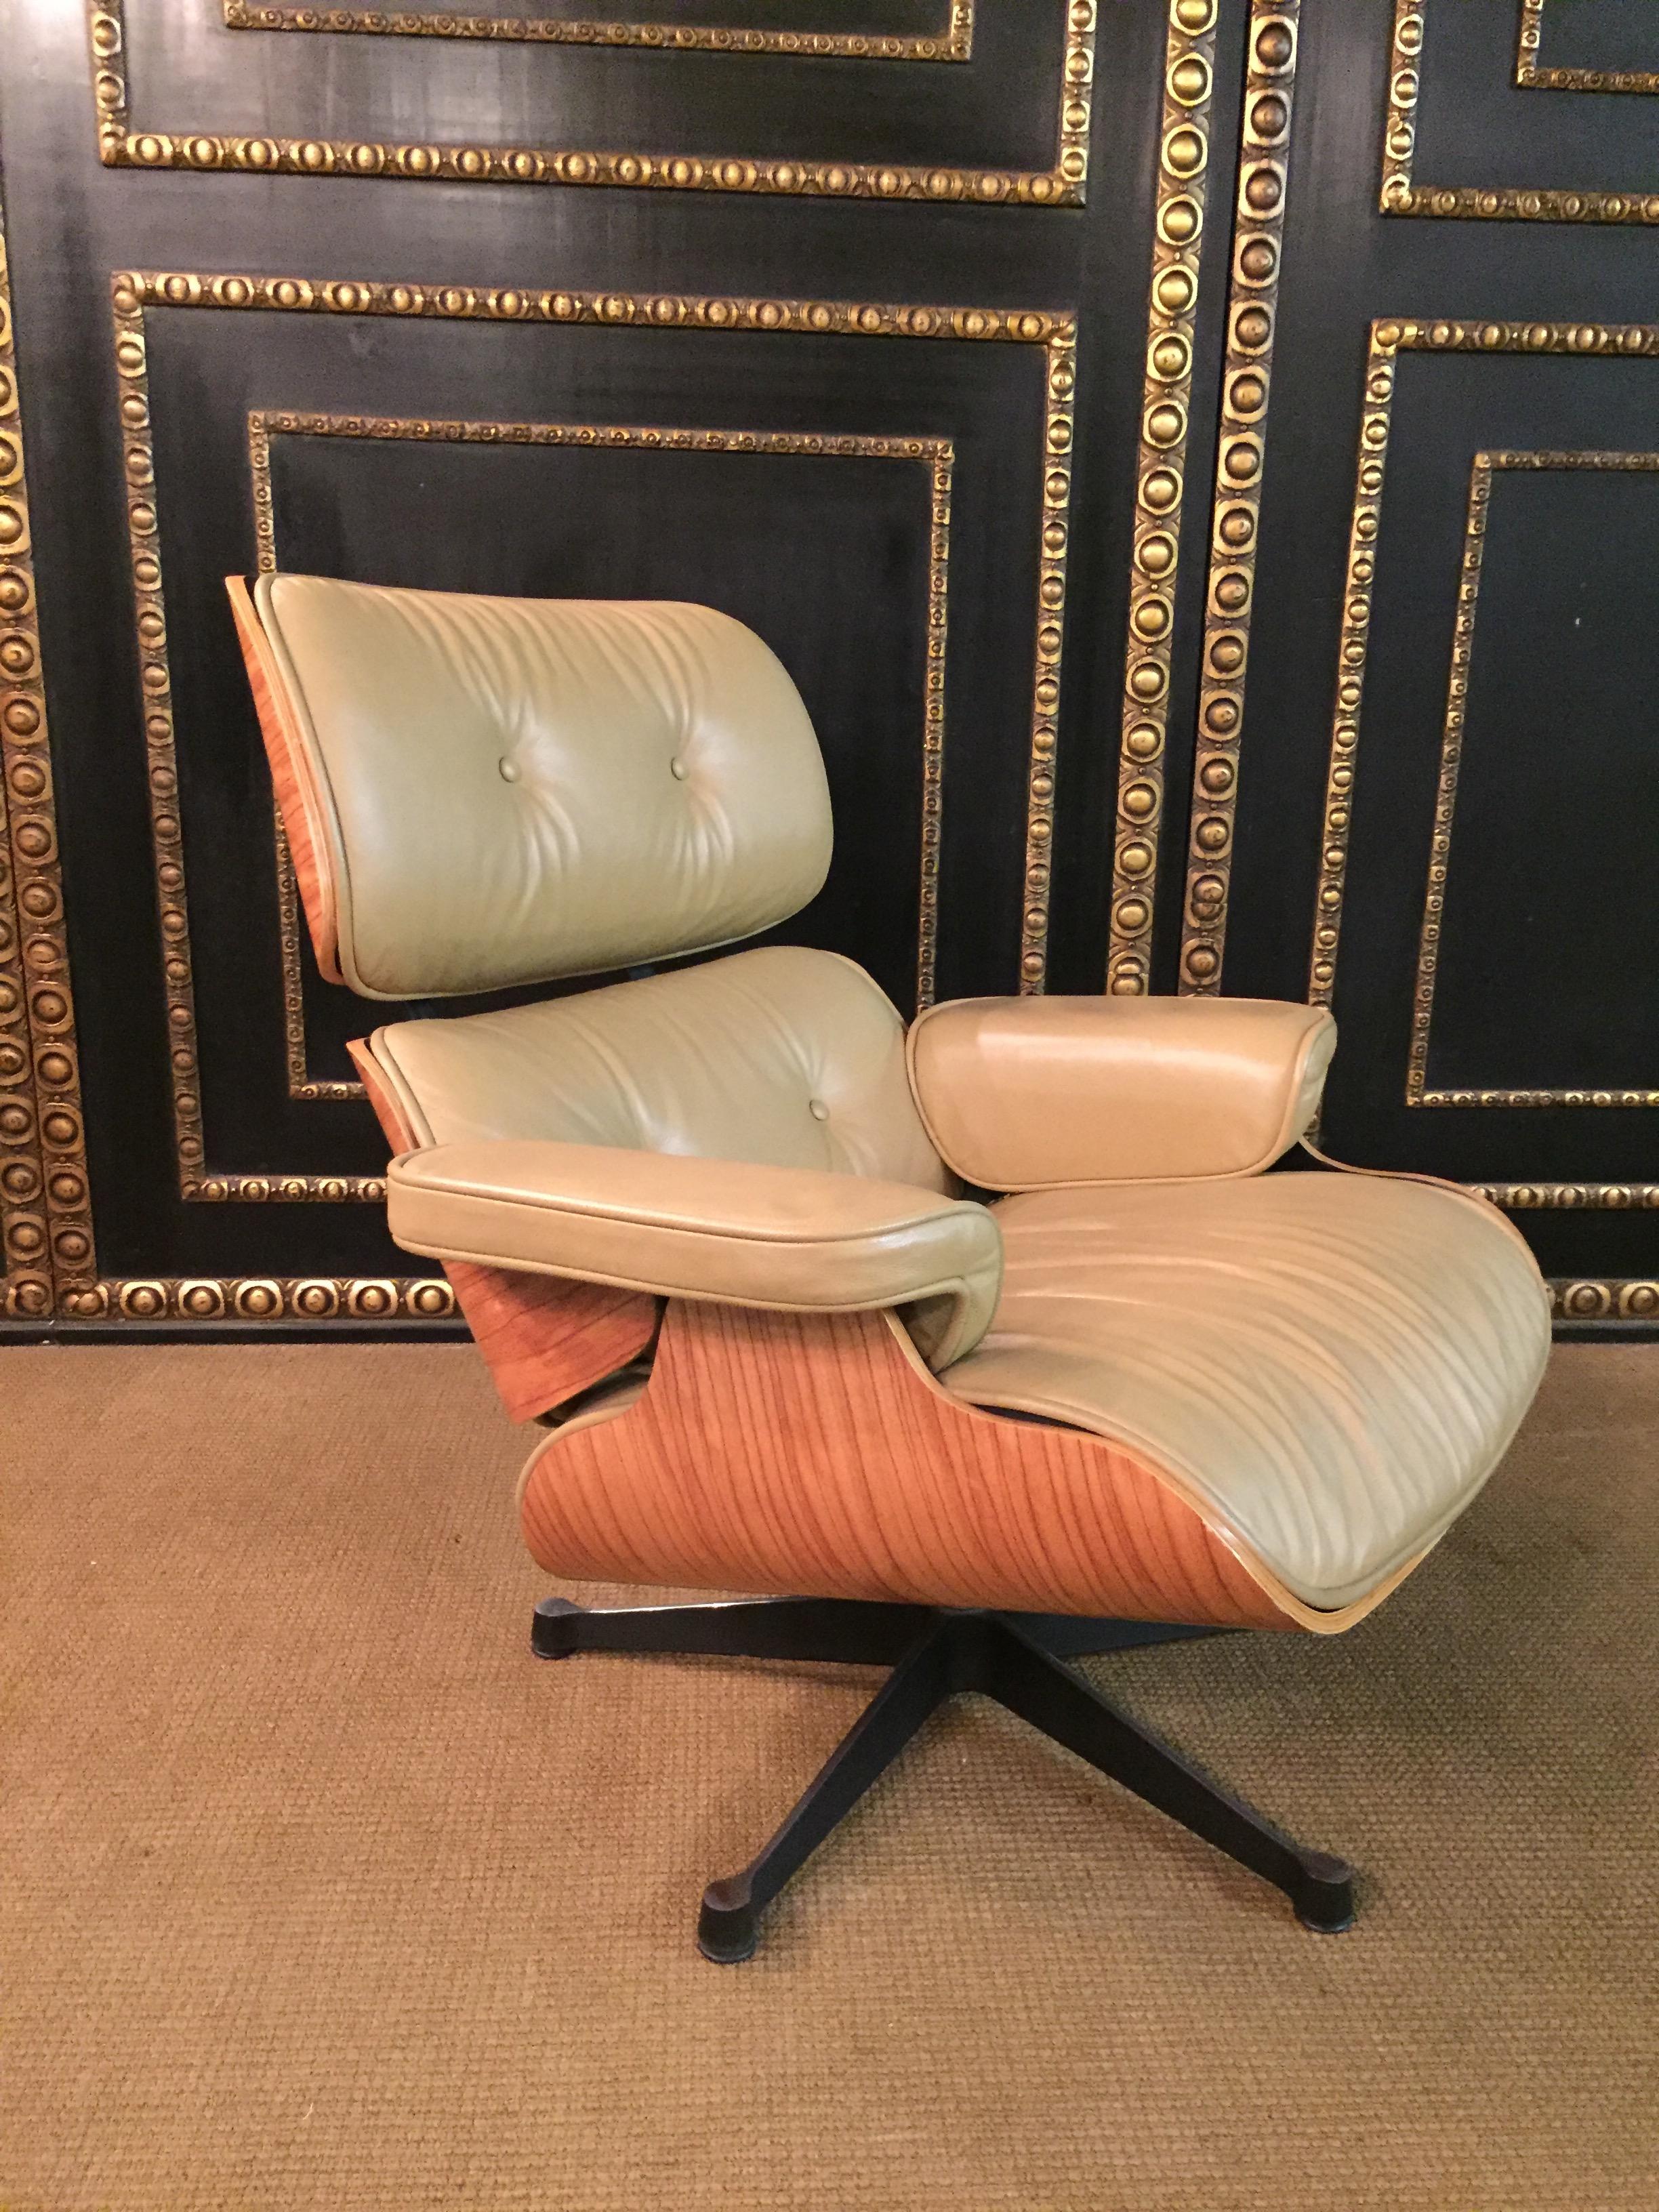 20th Century Charles Eames Style Lounge Chair with Ottoman